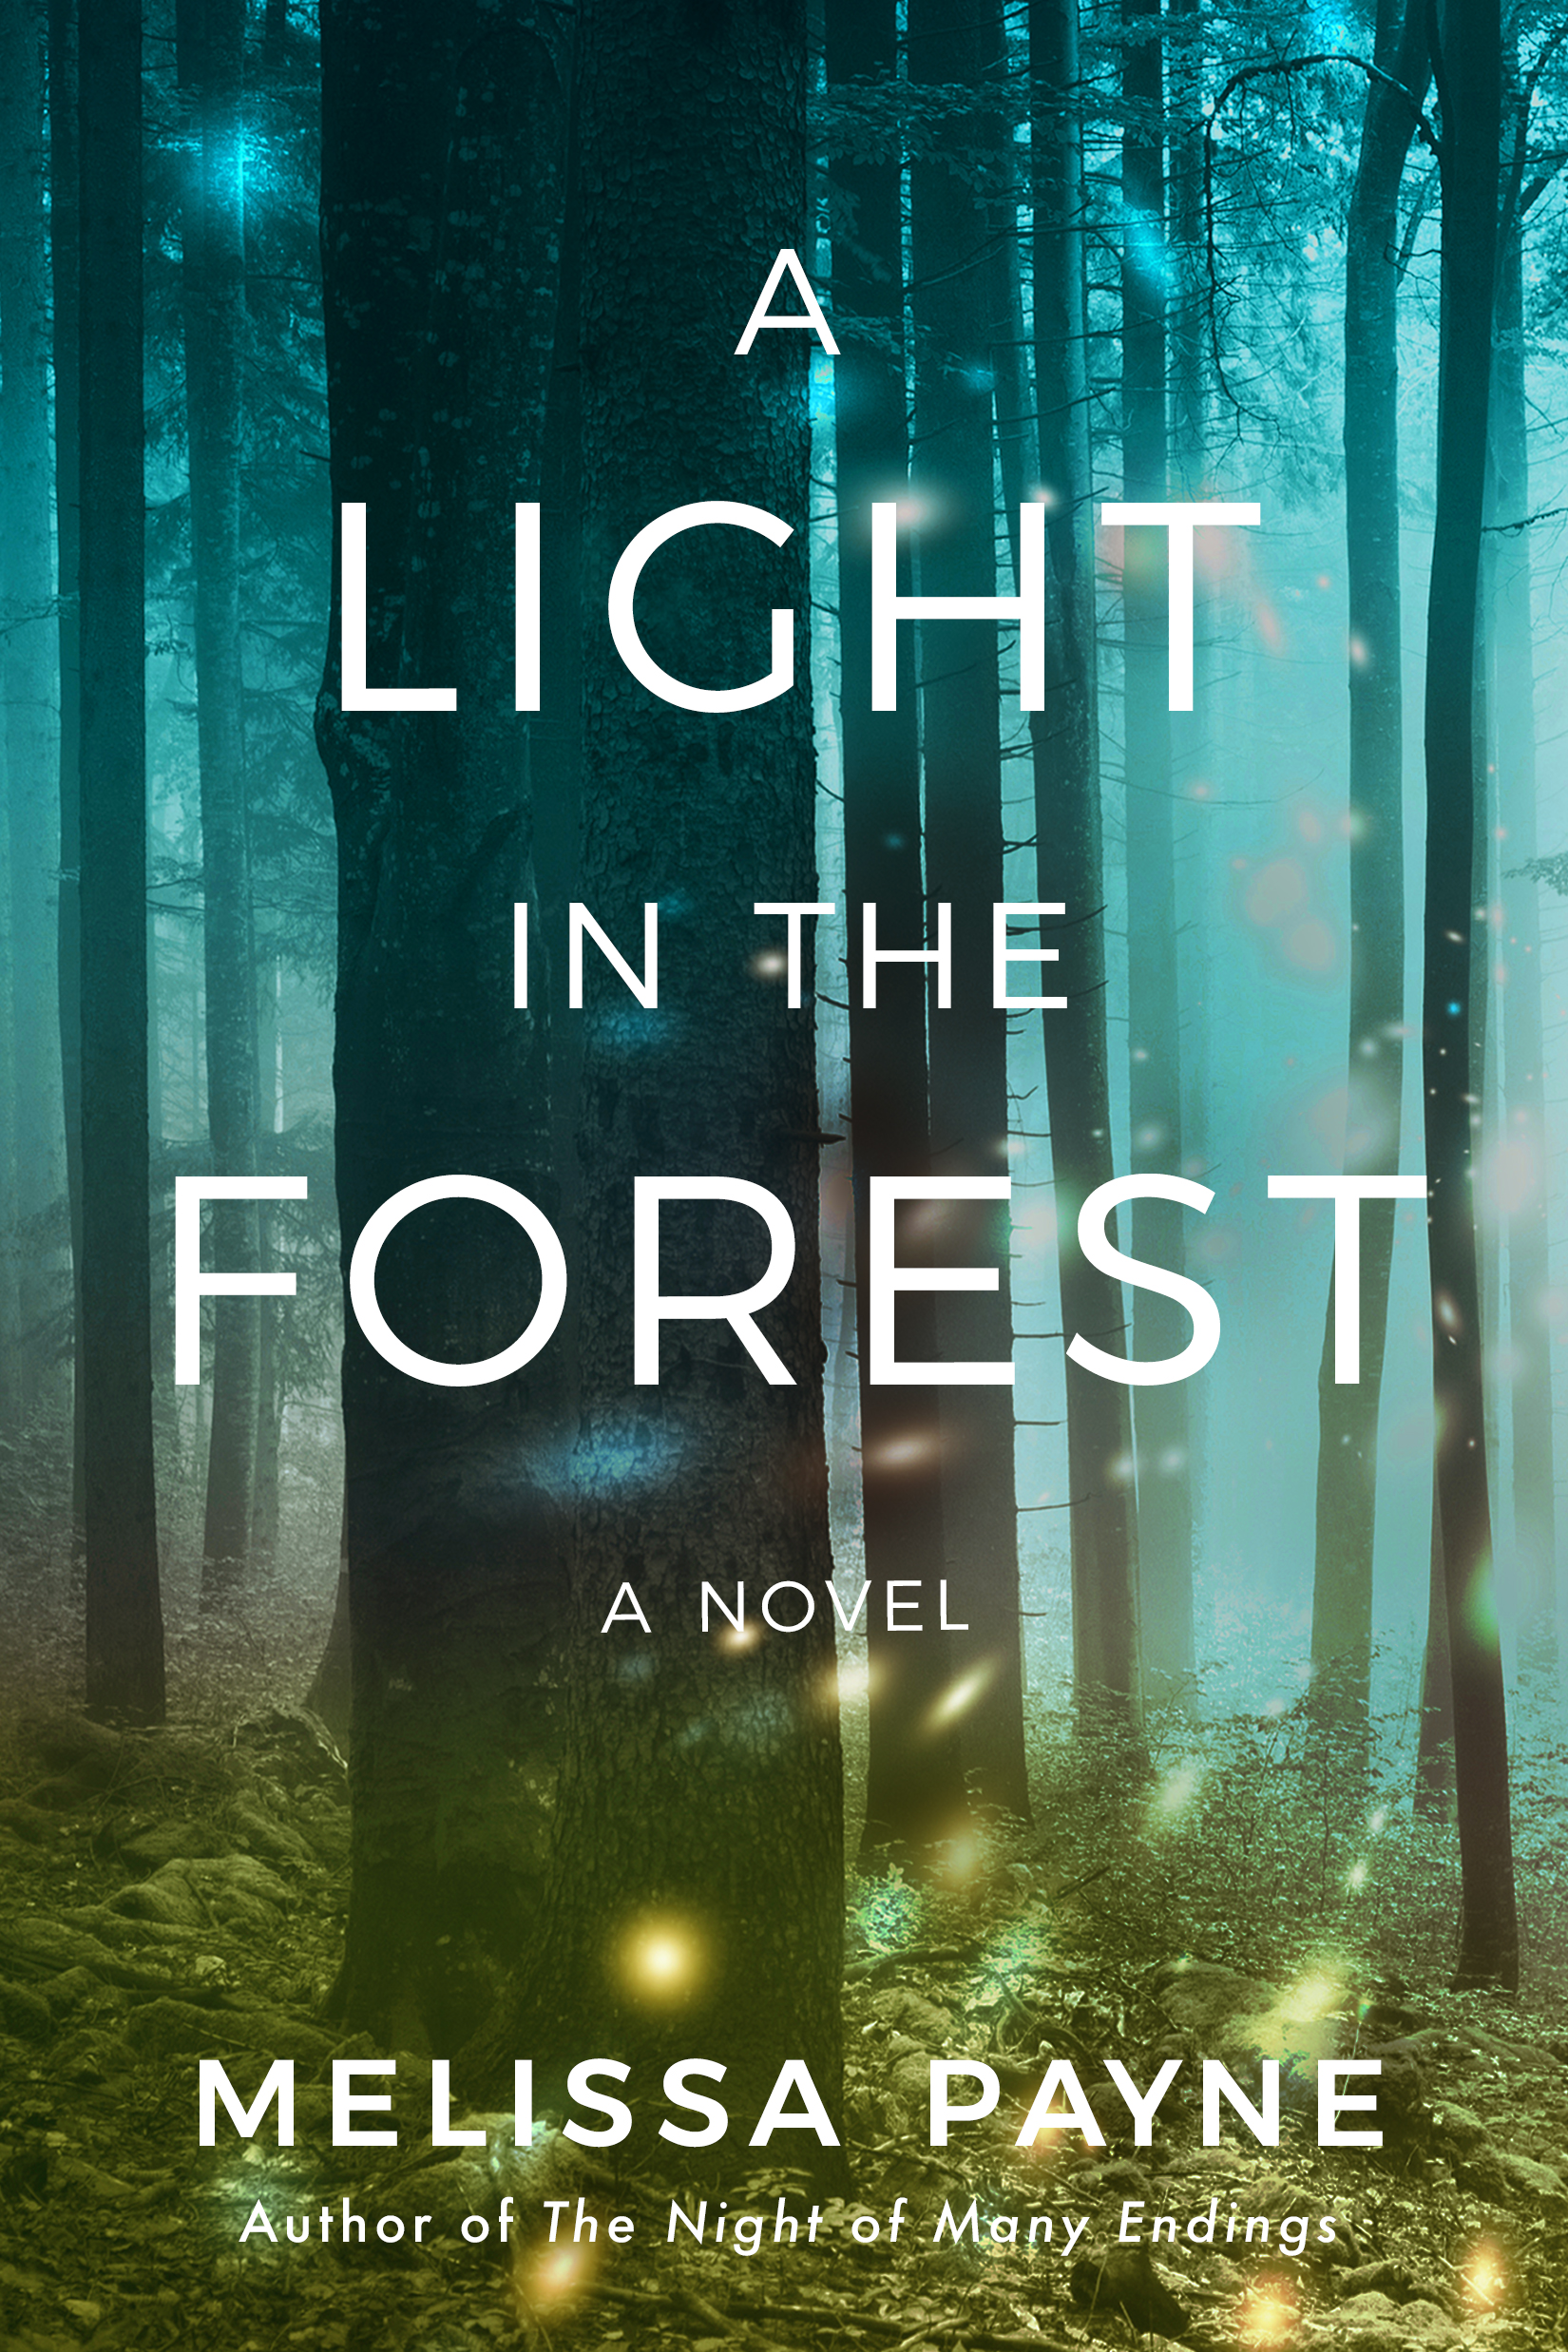 A Light in the Forest by Melissa Payne PDF Download